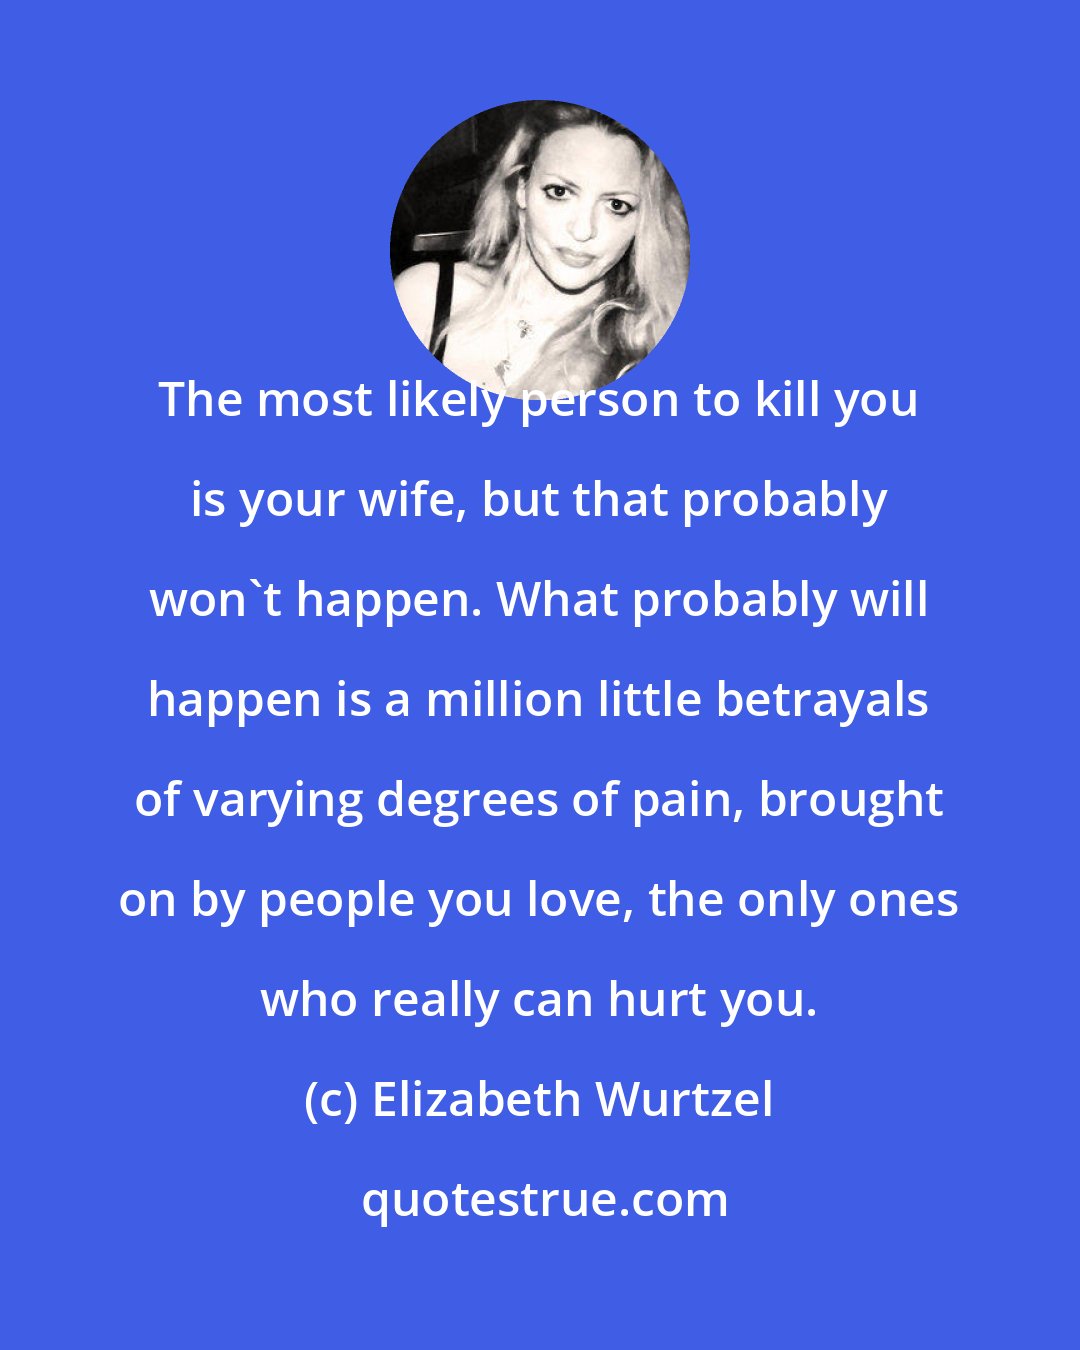 Elizabeth Wurtzel: The most likely person to kill you is your wife, but that probably won't happen. What probably will happen is a million little betrayals of varying degrees of pain, brought on by people you love, the only ones who really can hurt you.